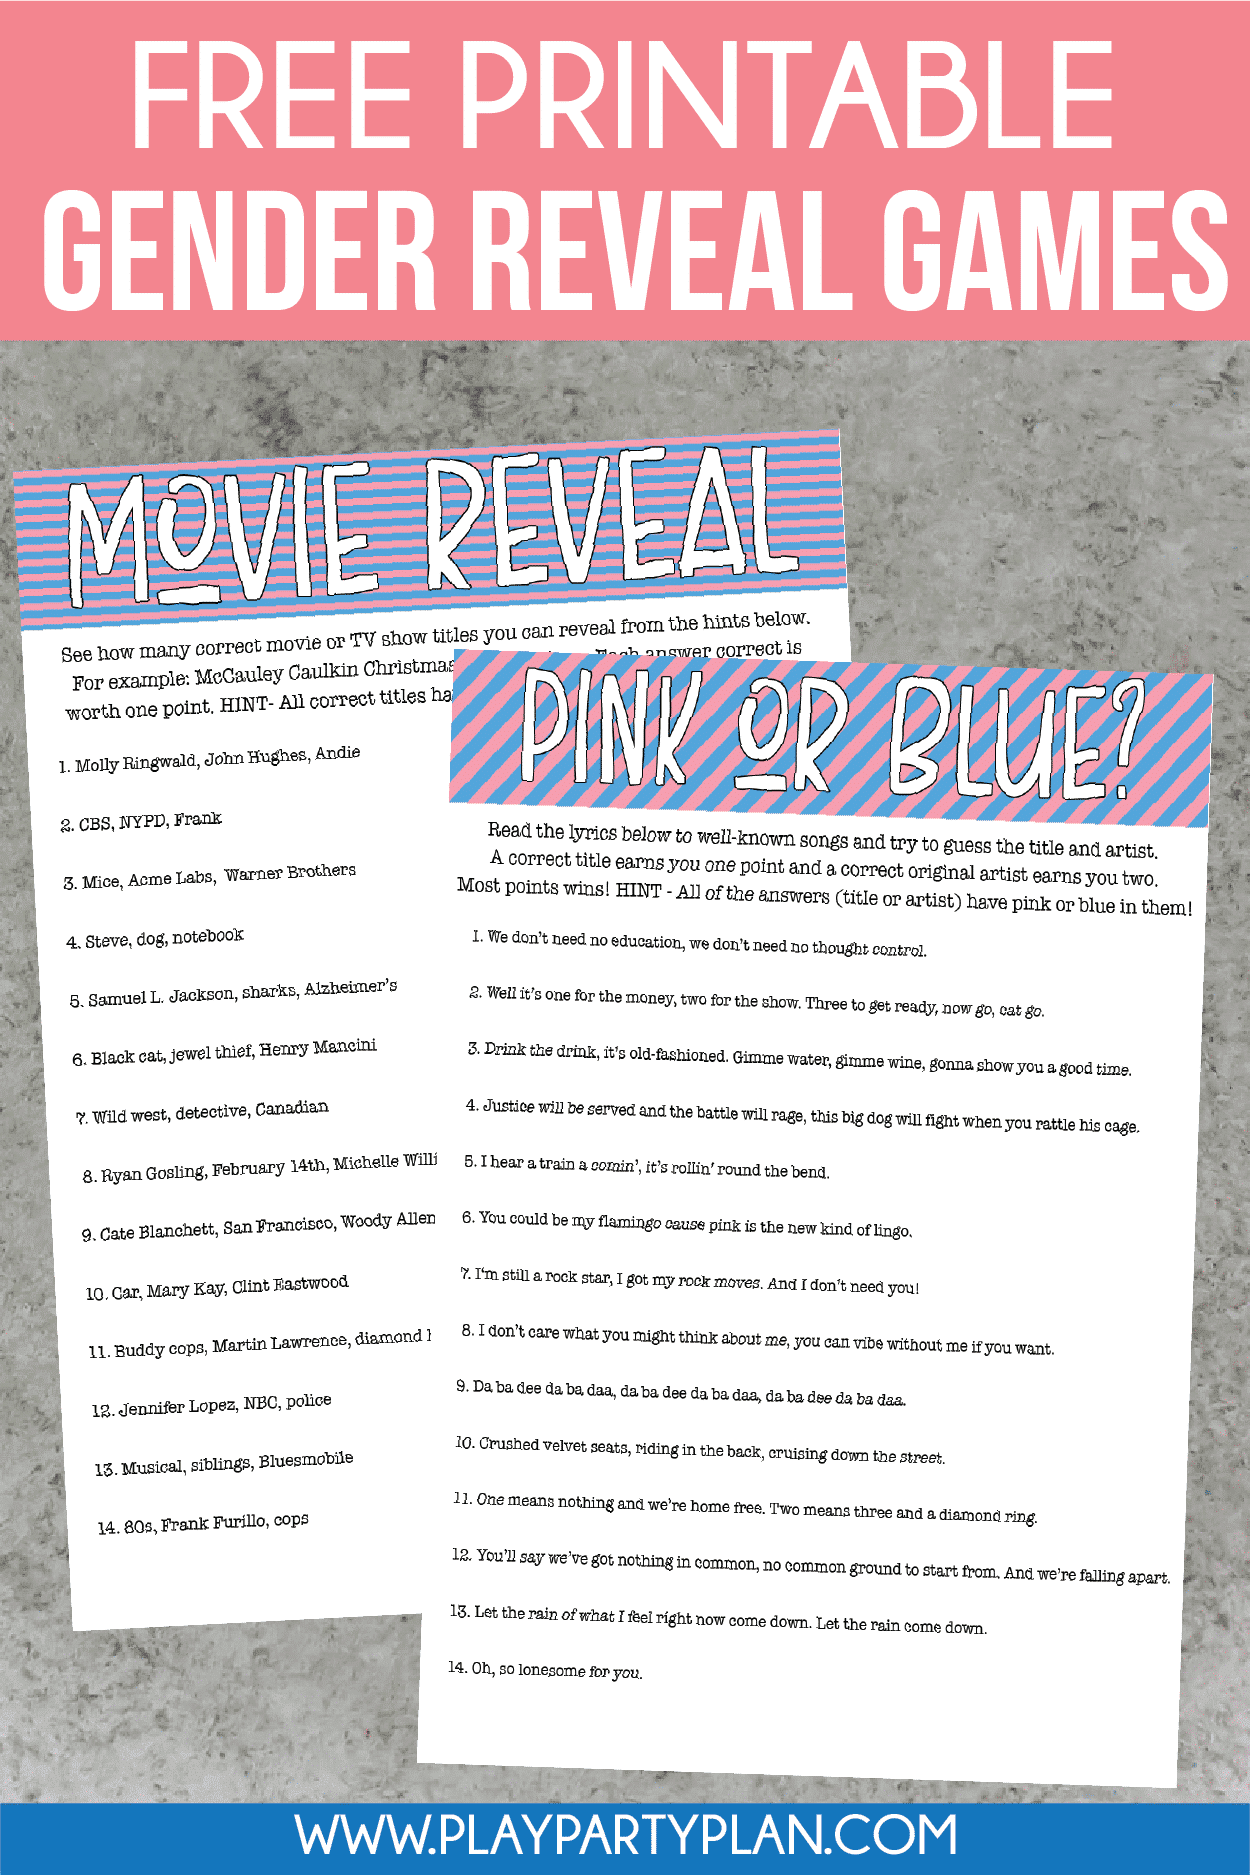 Free printable gender reveal party games inspired by pop culture 